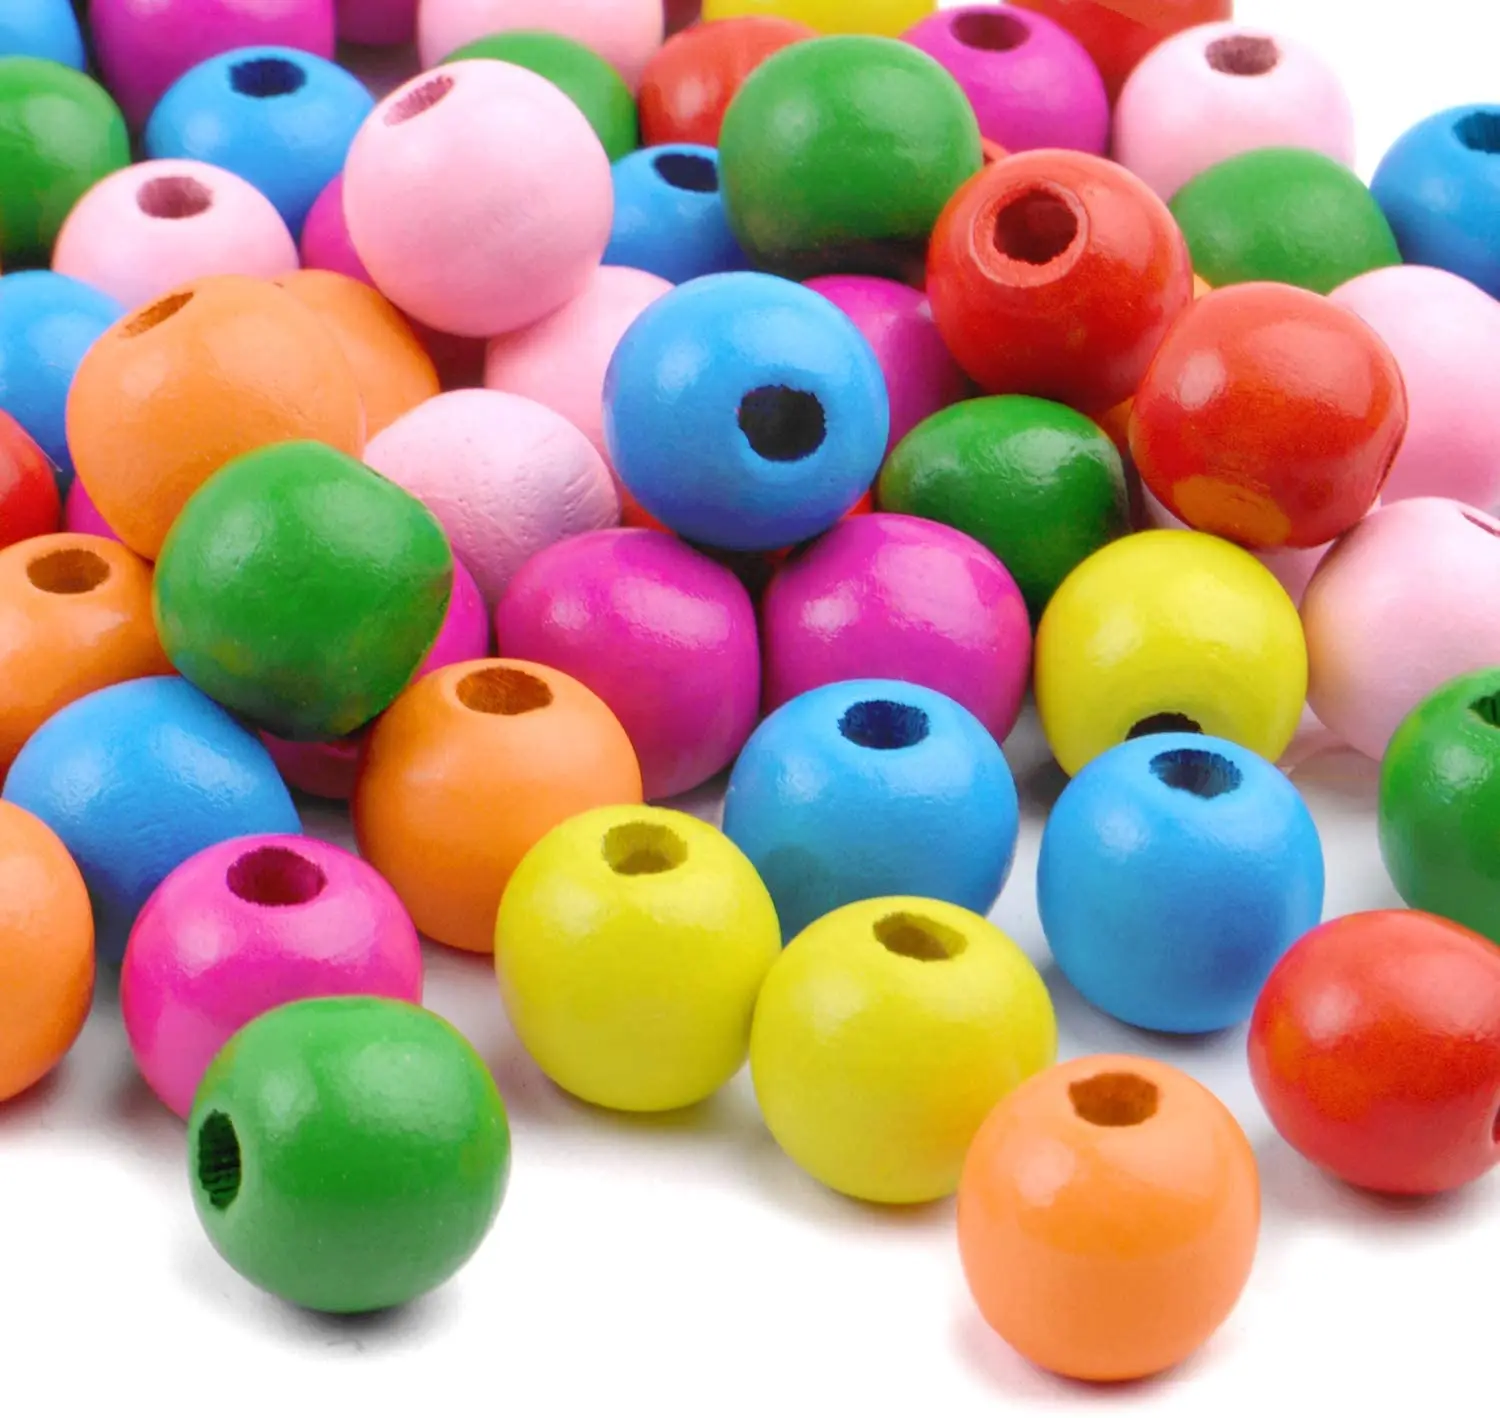 

30PCS Colorful Round Wood Bead 16MM Loose Round Ball Spacer Beading Natural Wood Beads For Jewelry Making DIY Bracele Finding